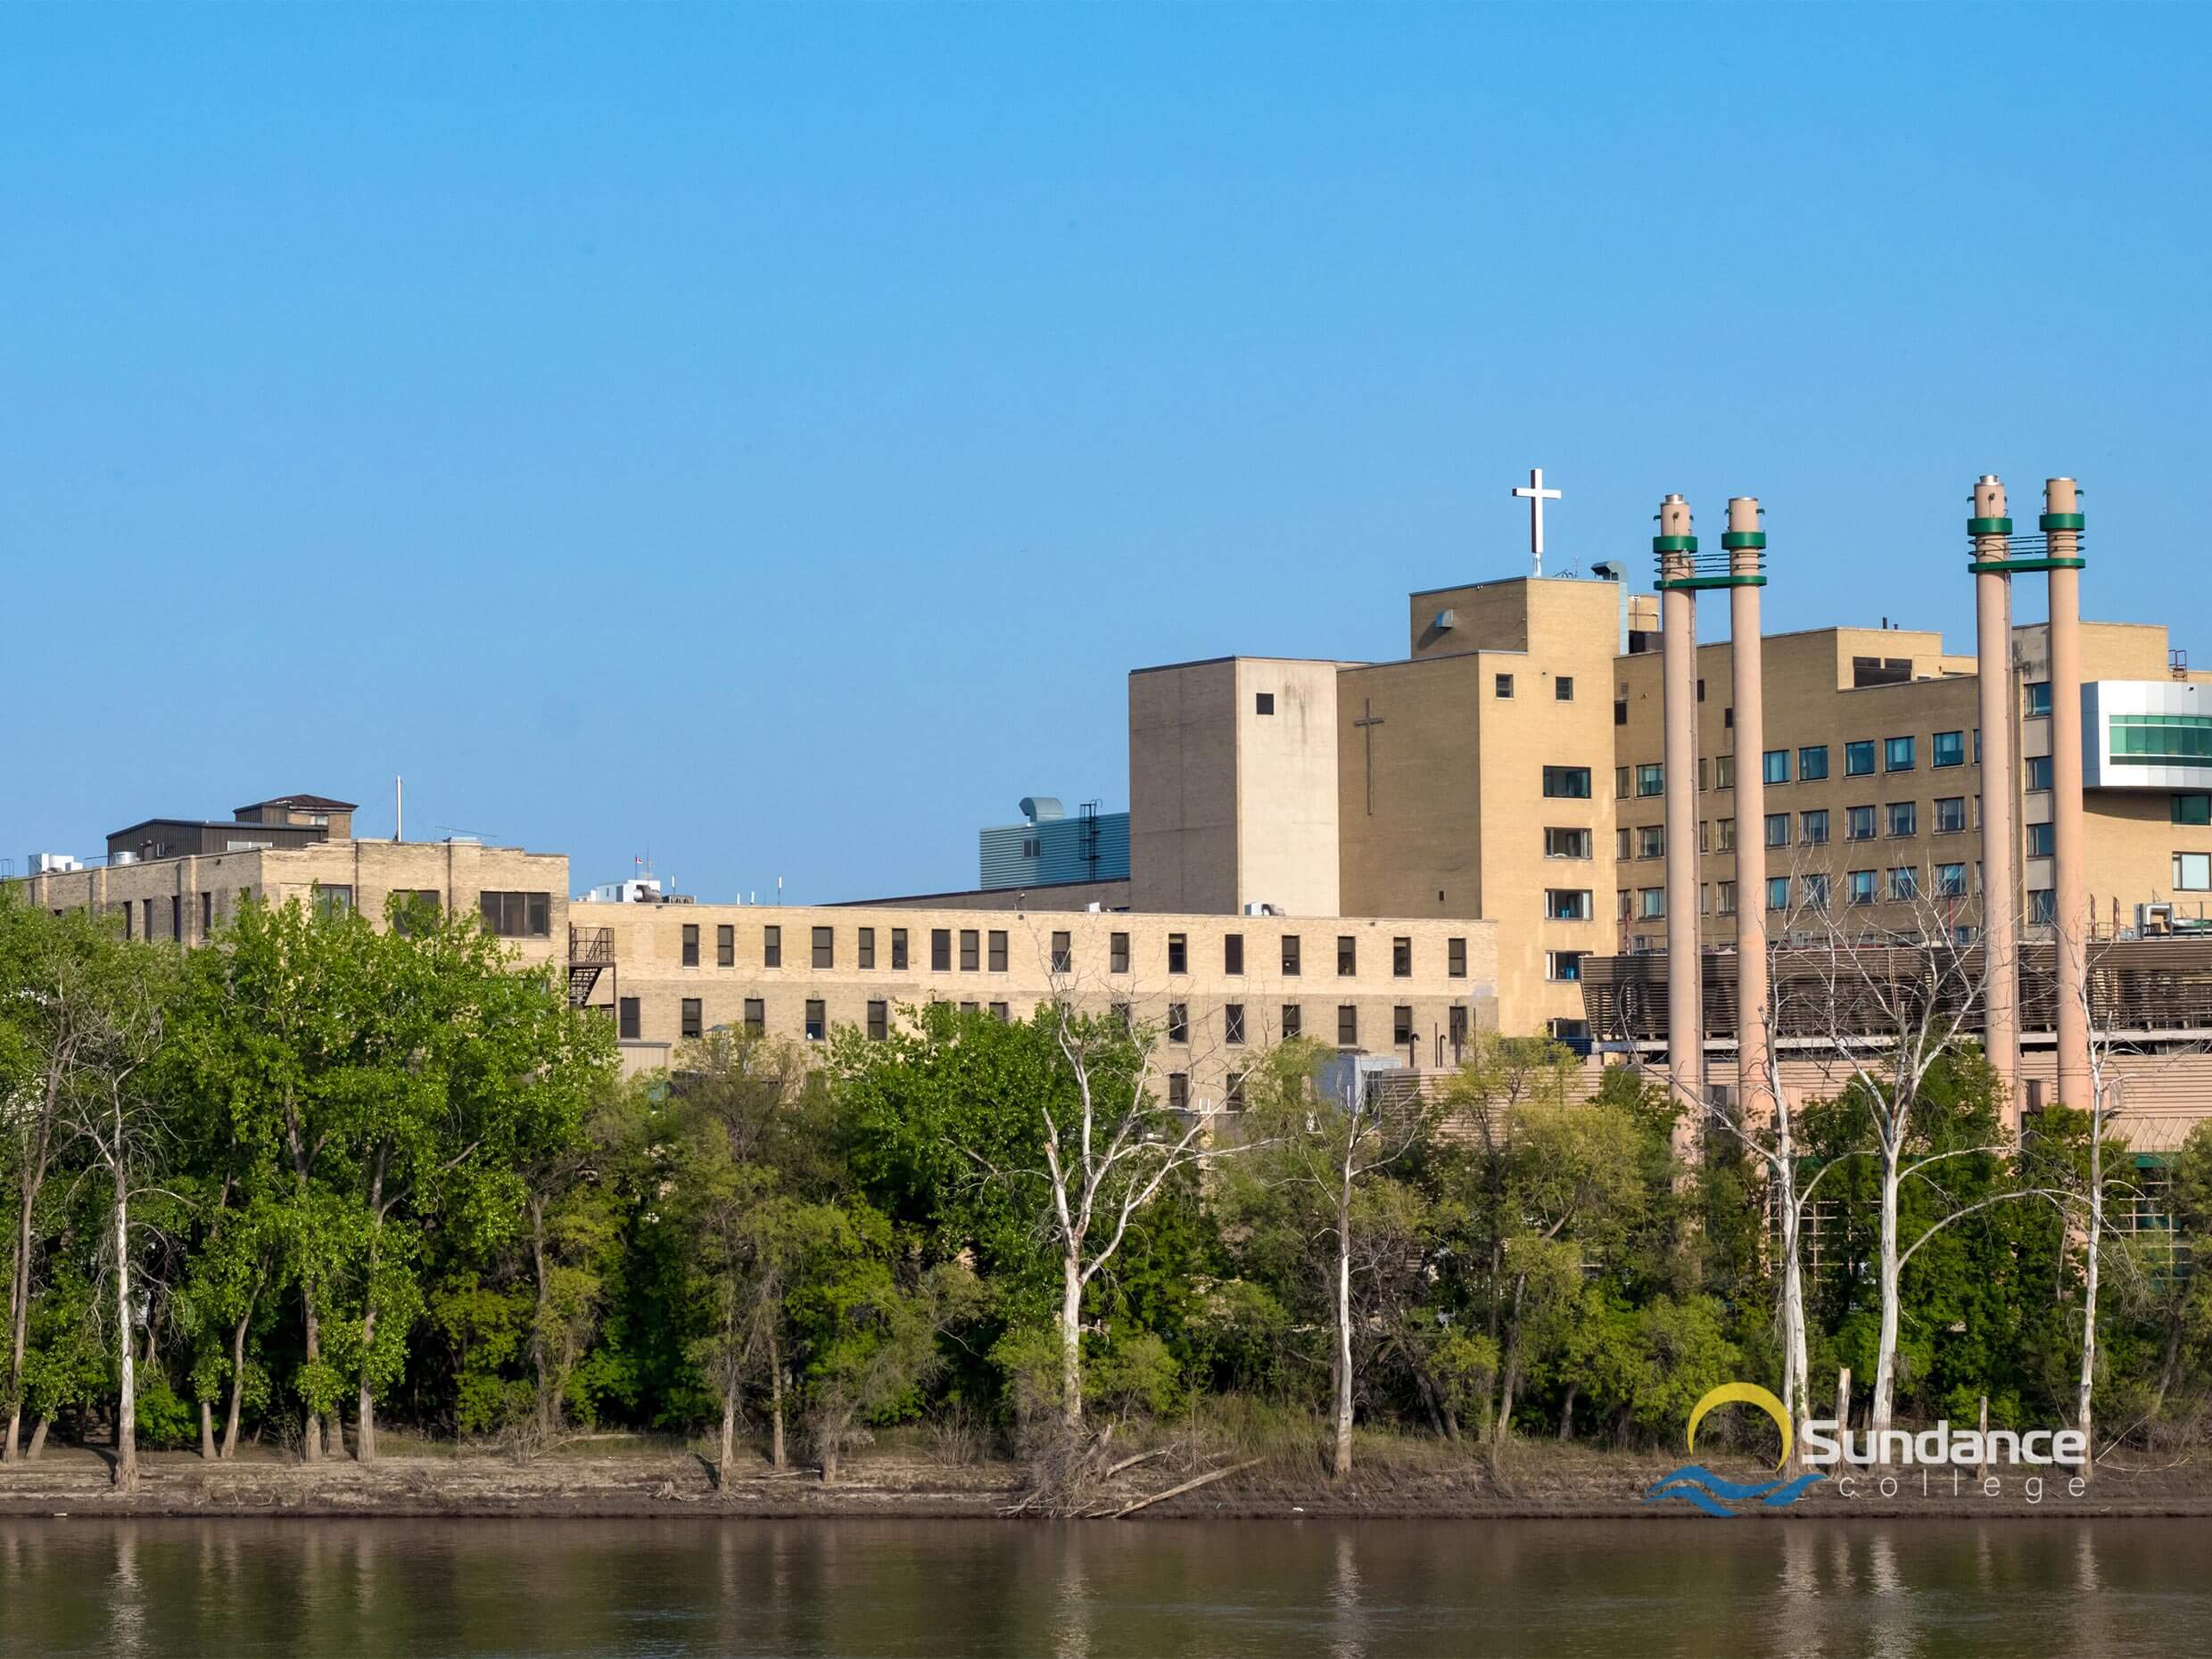 View of the St. Boniface Hospital across the Red River where pharmacists require the help of pharmacy assistant diploma graduates in the hospital pharmacy